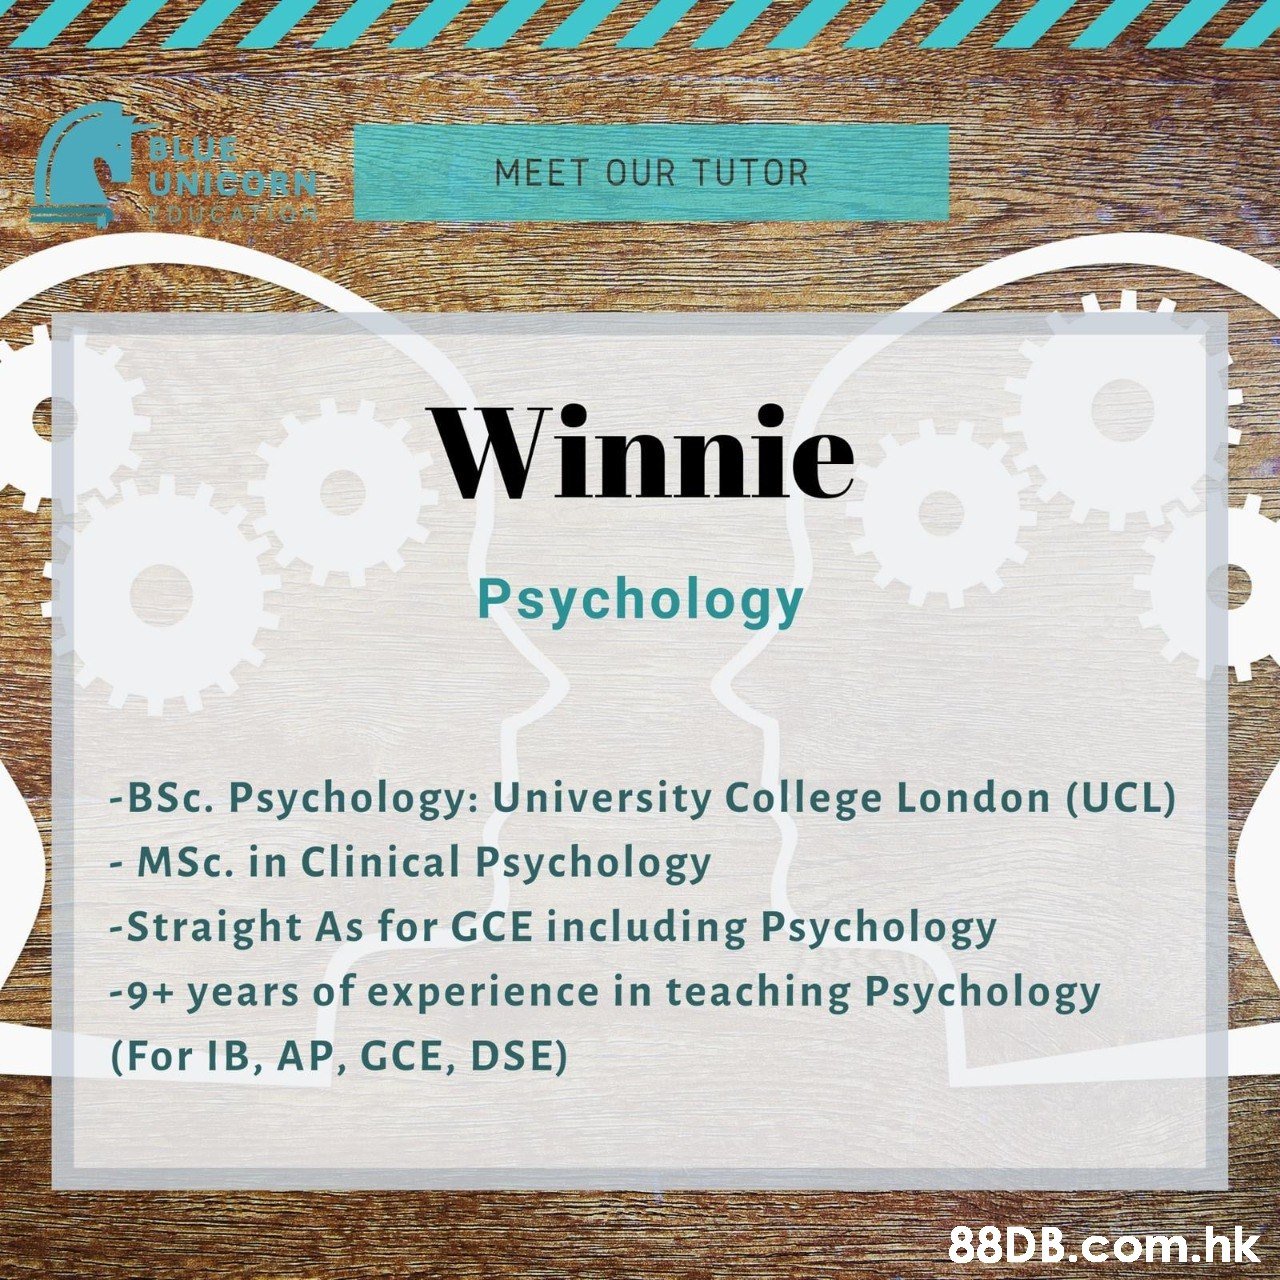 MEET OUR TUTOR UNICO! Winnie Psychology -BSc. Psychology: University College London (UCL) - MSc. in Clinical Psychology -Straight As for GCE including Psychology -9+ years of experience in teaching Psychology (For IB, AP, GCE, DSE) .hk  Text,Font,Turquoise,Invitation